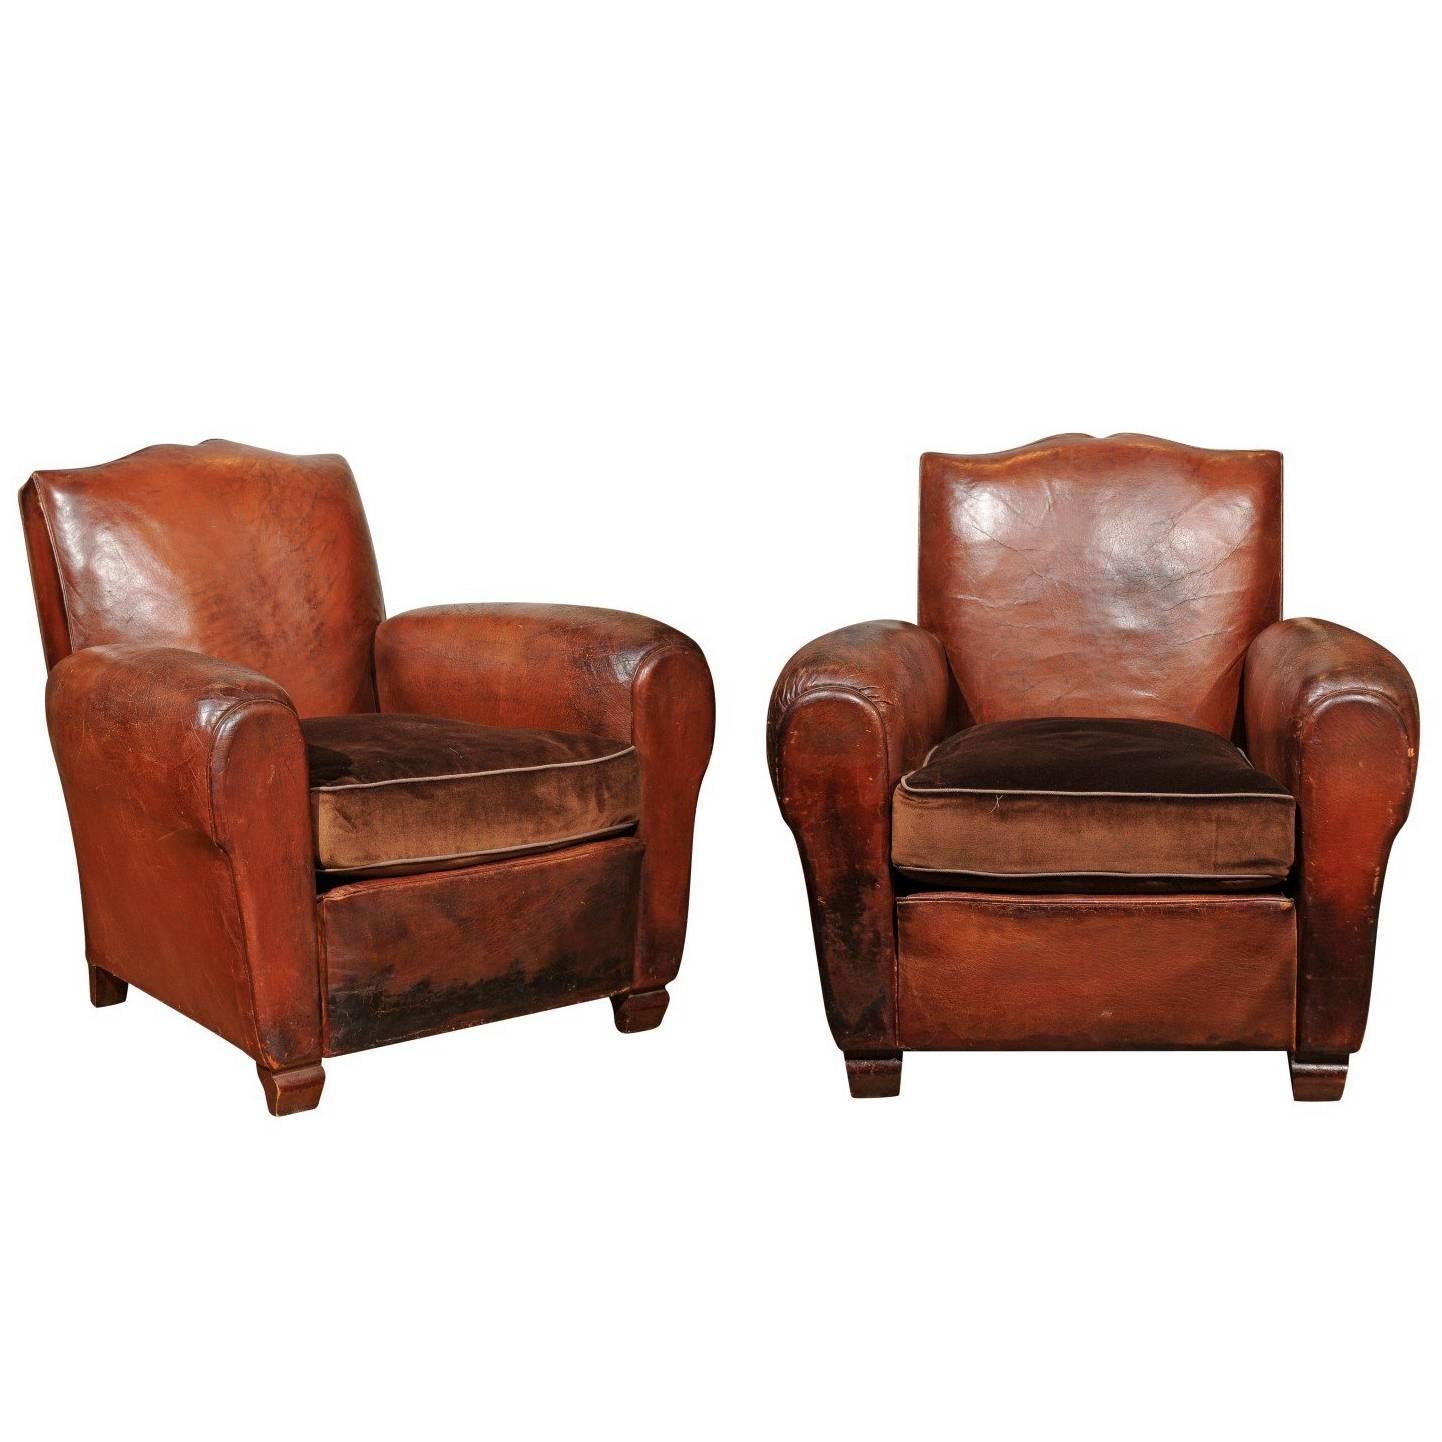 Pair of French Leather Club Chairs with Brown Velvet Seat Cushions, circa 1910 For Sale